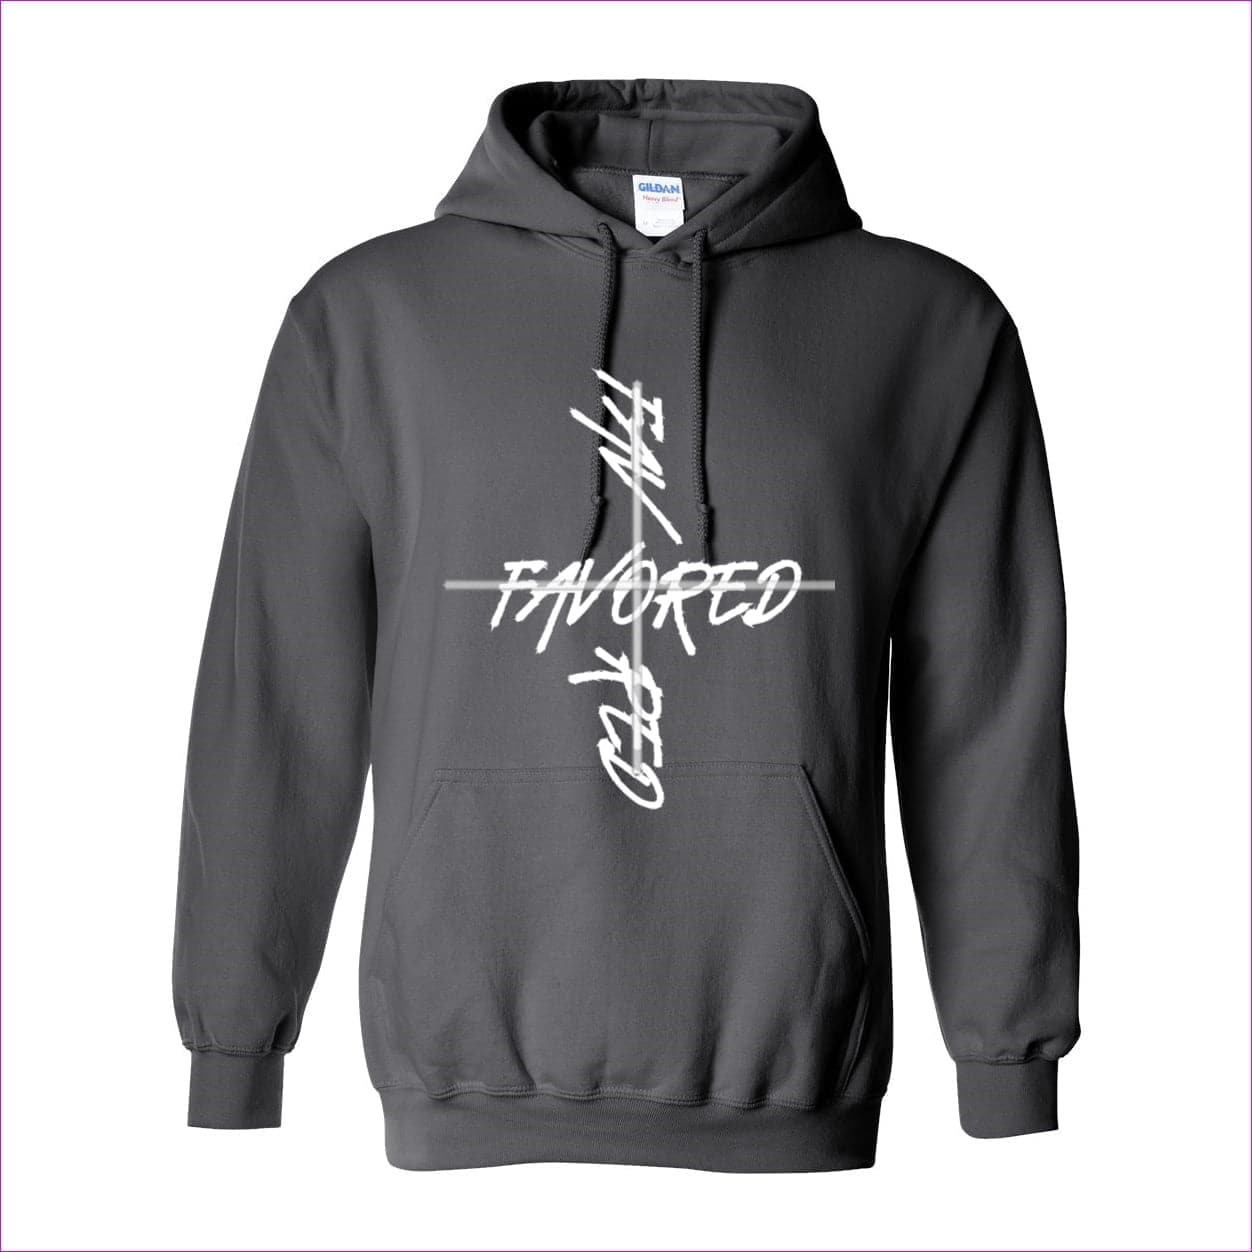 Charcoal Favored 2 Unisex Heavy Blend Hooded Sweatshirt - unisex hoodies at TFC&H Co.